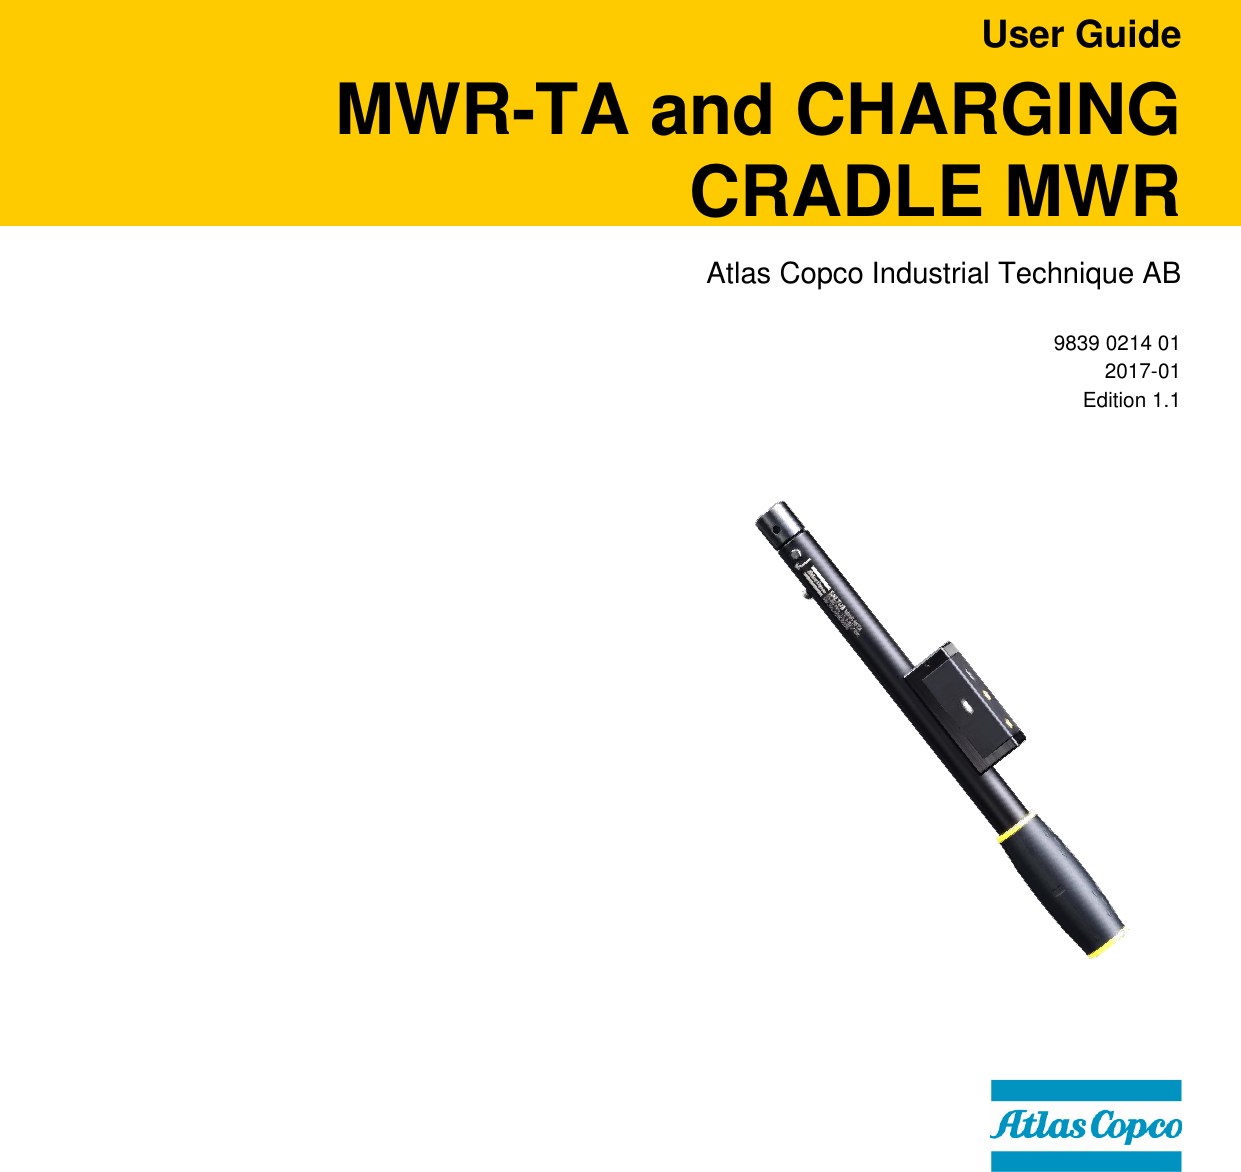   User Guide MWR-TA and CHARGING CRADLE MWR Atlas Copco Industrial Technique AB 9839 0214 01 2017-01 Edition 1.1    